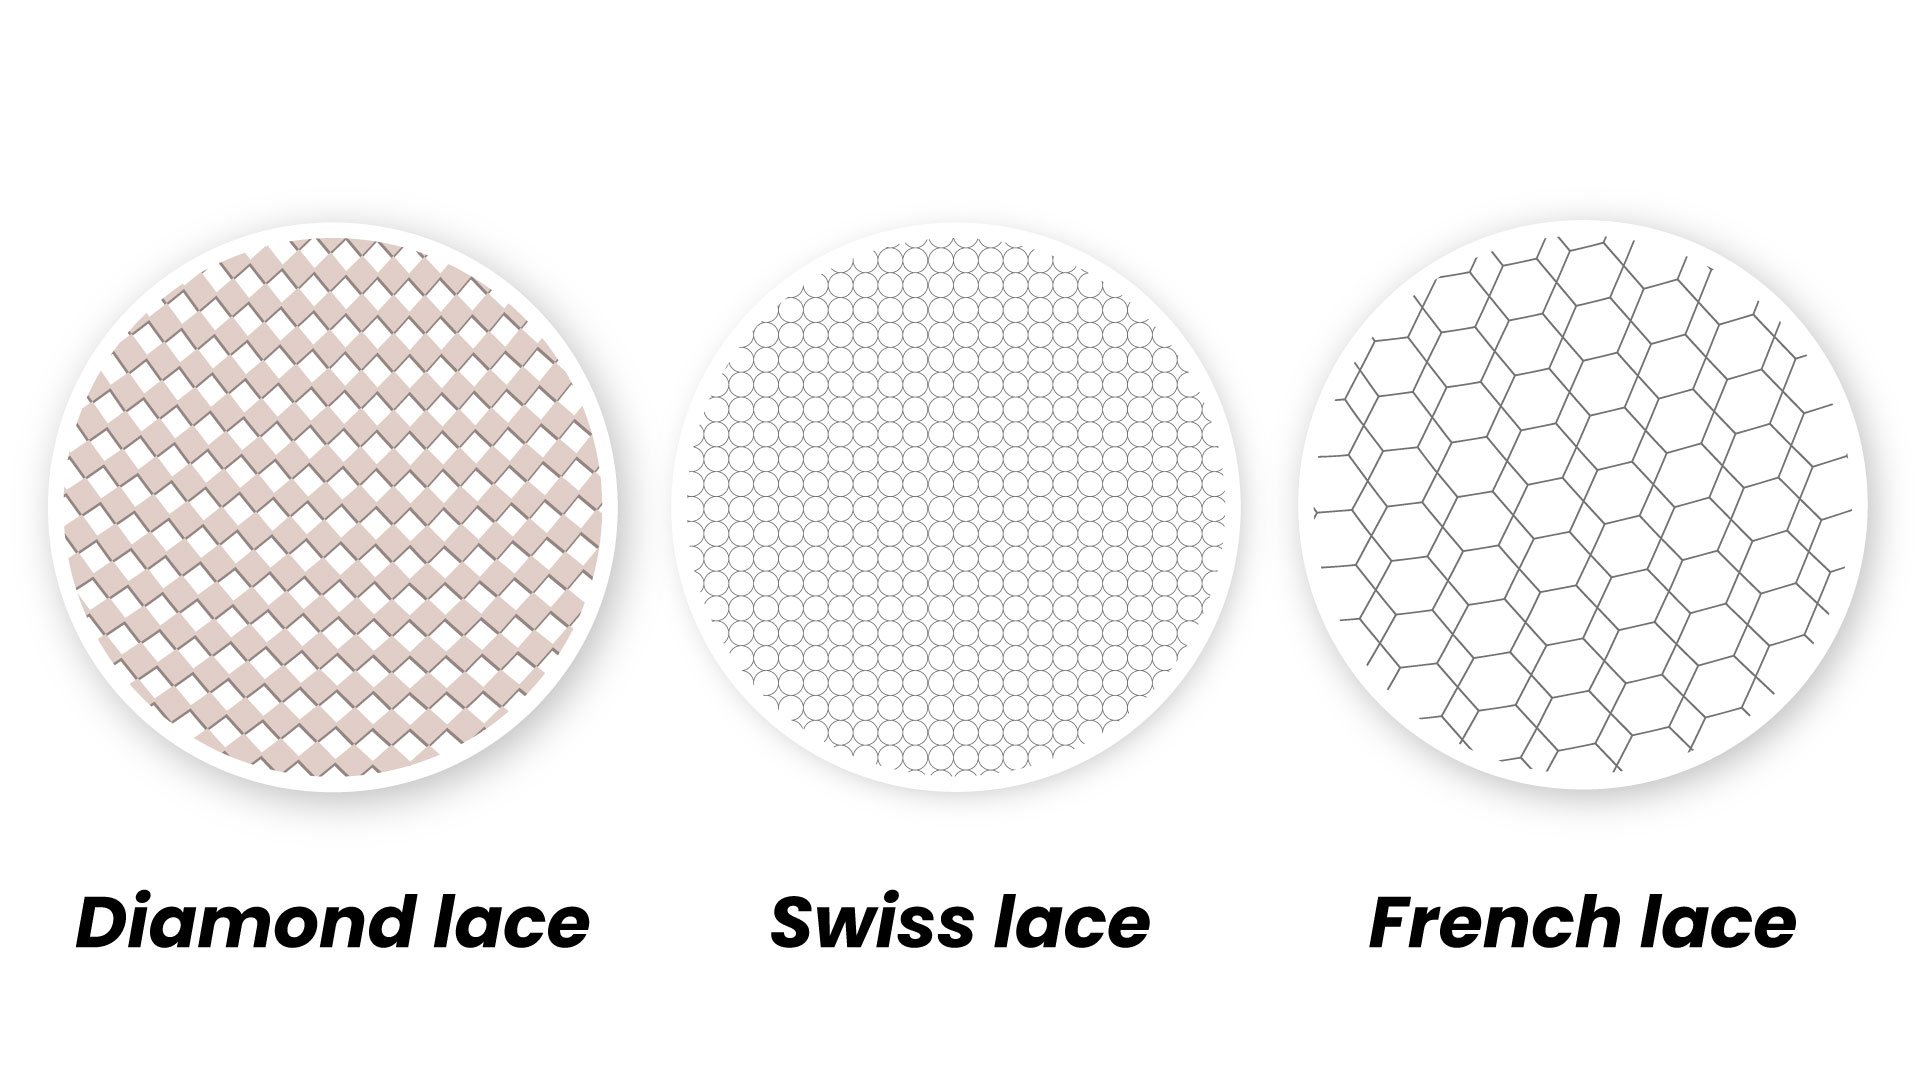 How does it differ from Swiss and French lace?